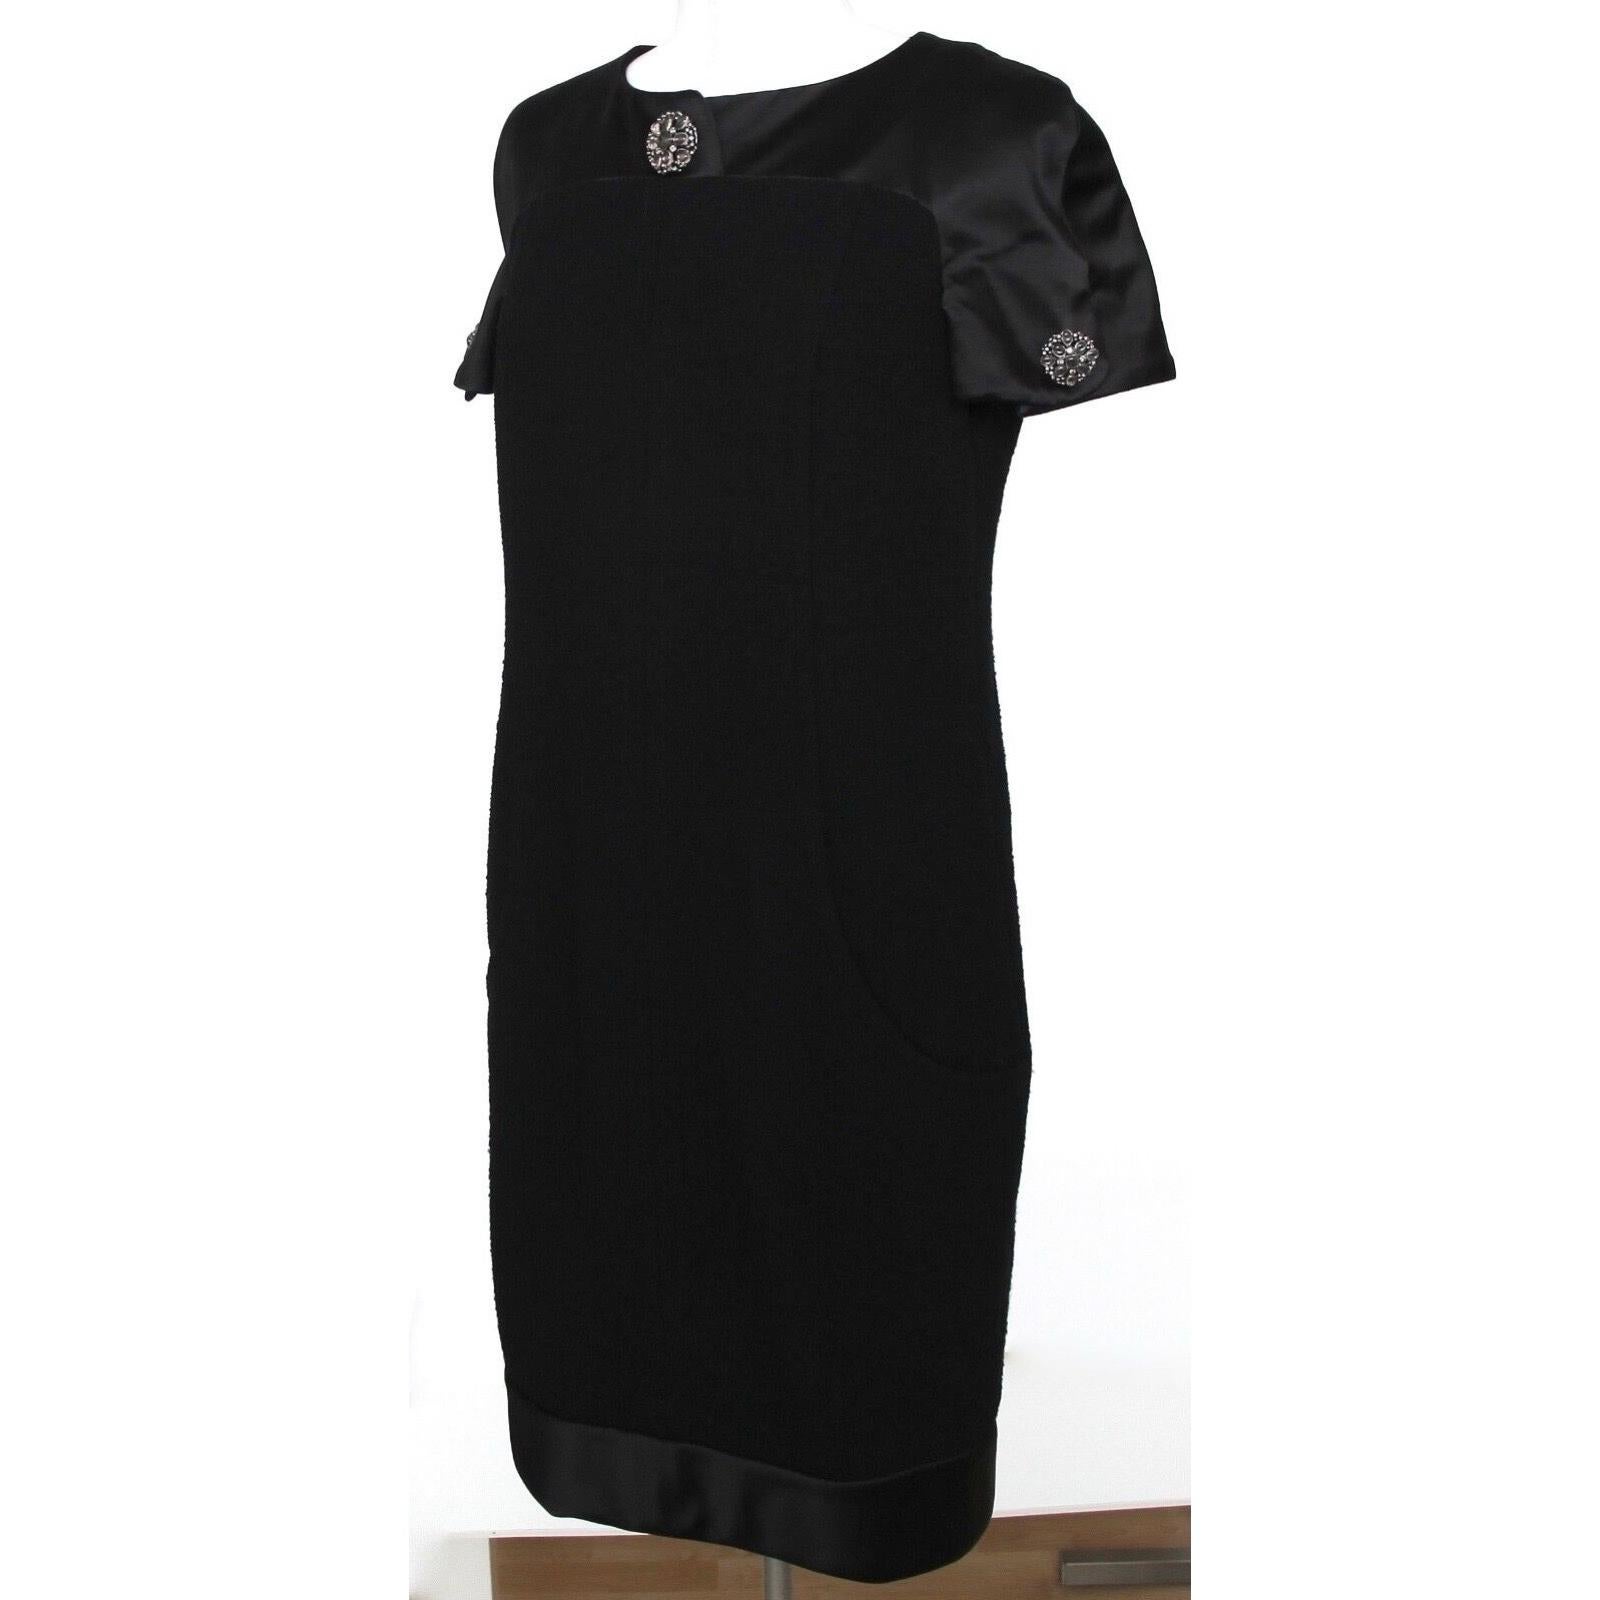 CHANEL Dress Wool Blend Black Satin Shift Cap Sleeve Gripoix Sz 38 2015 In Fair Condition For Sale In Hollywood, FL